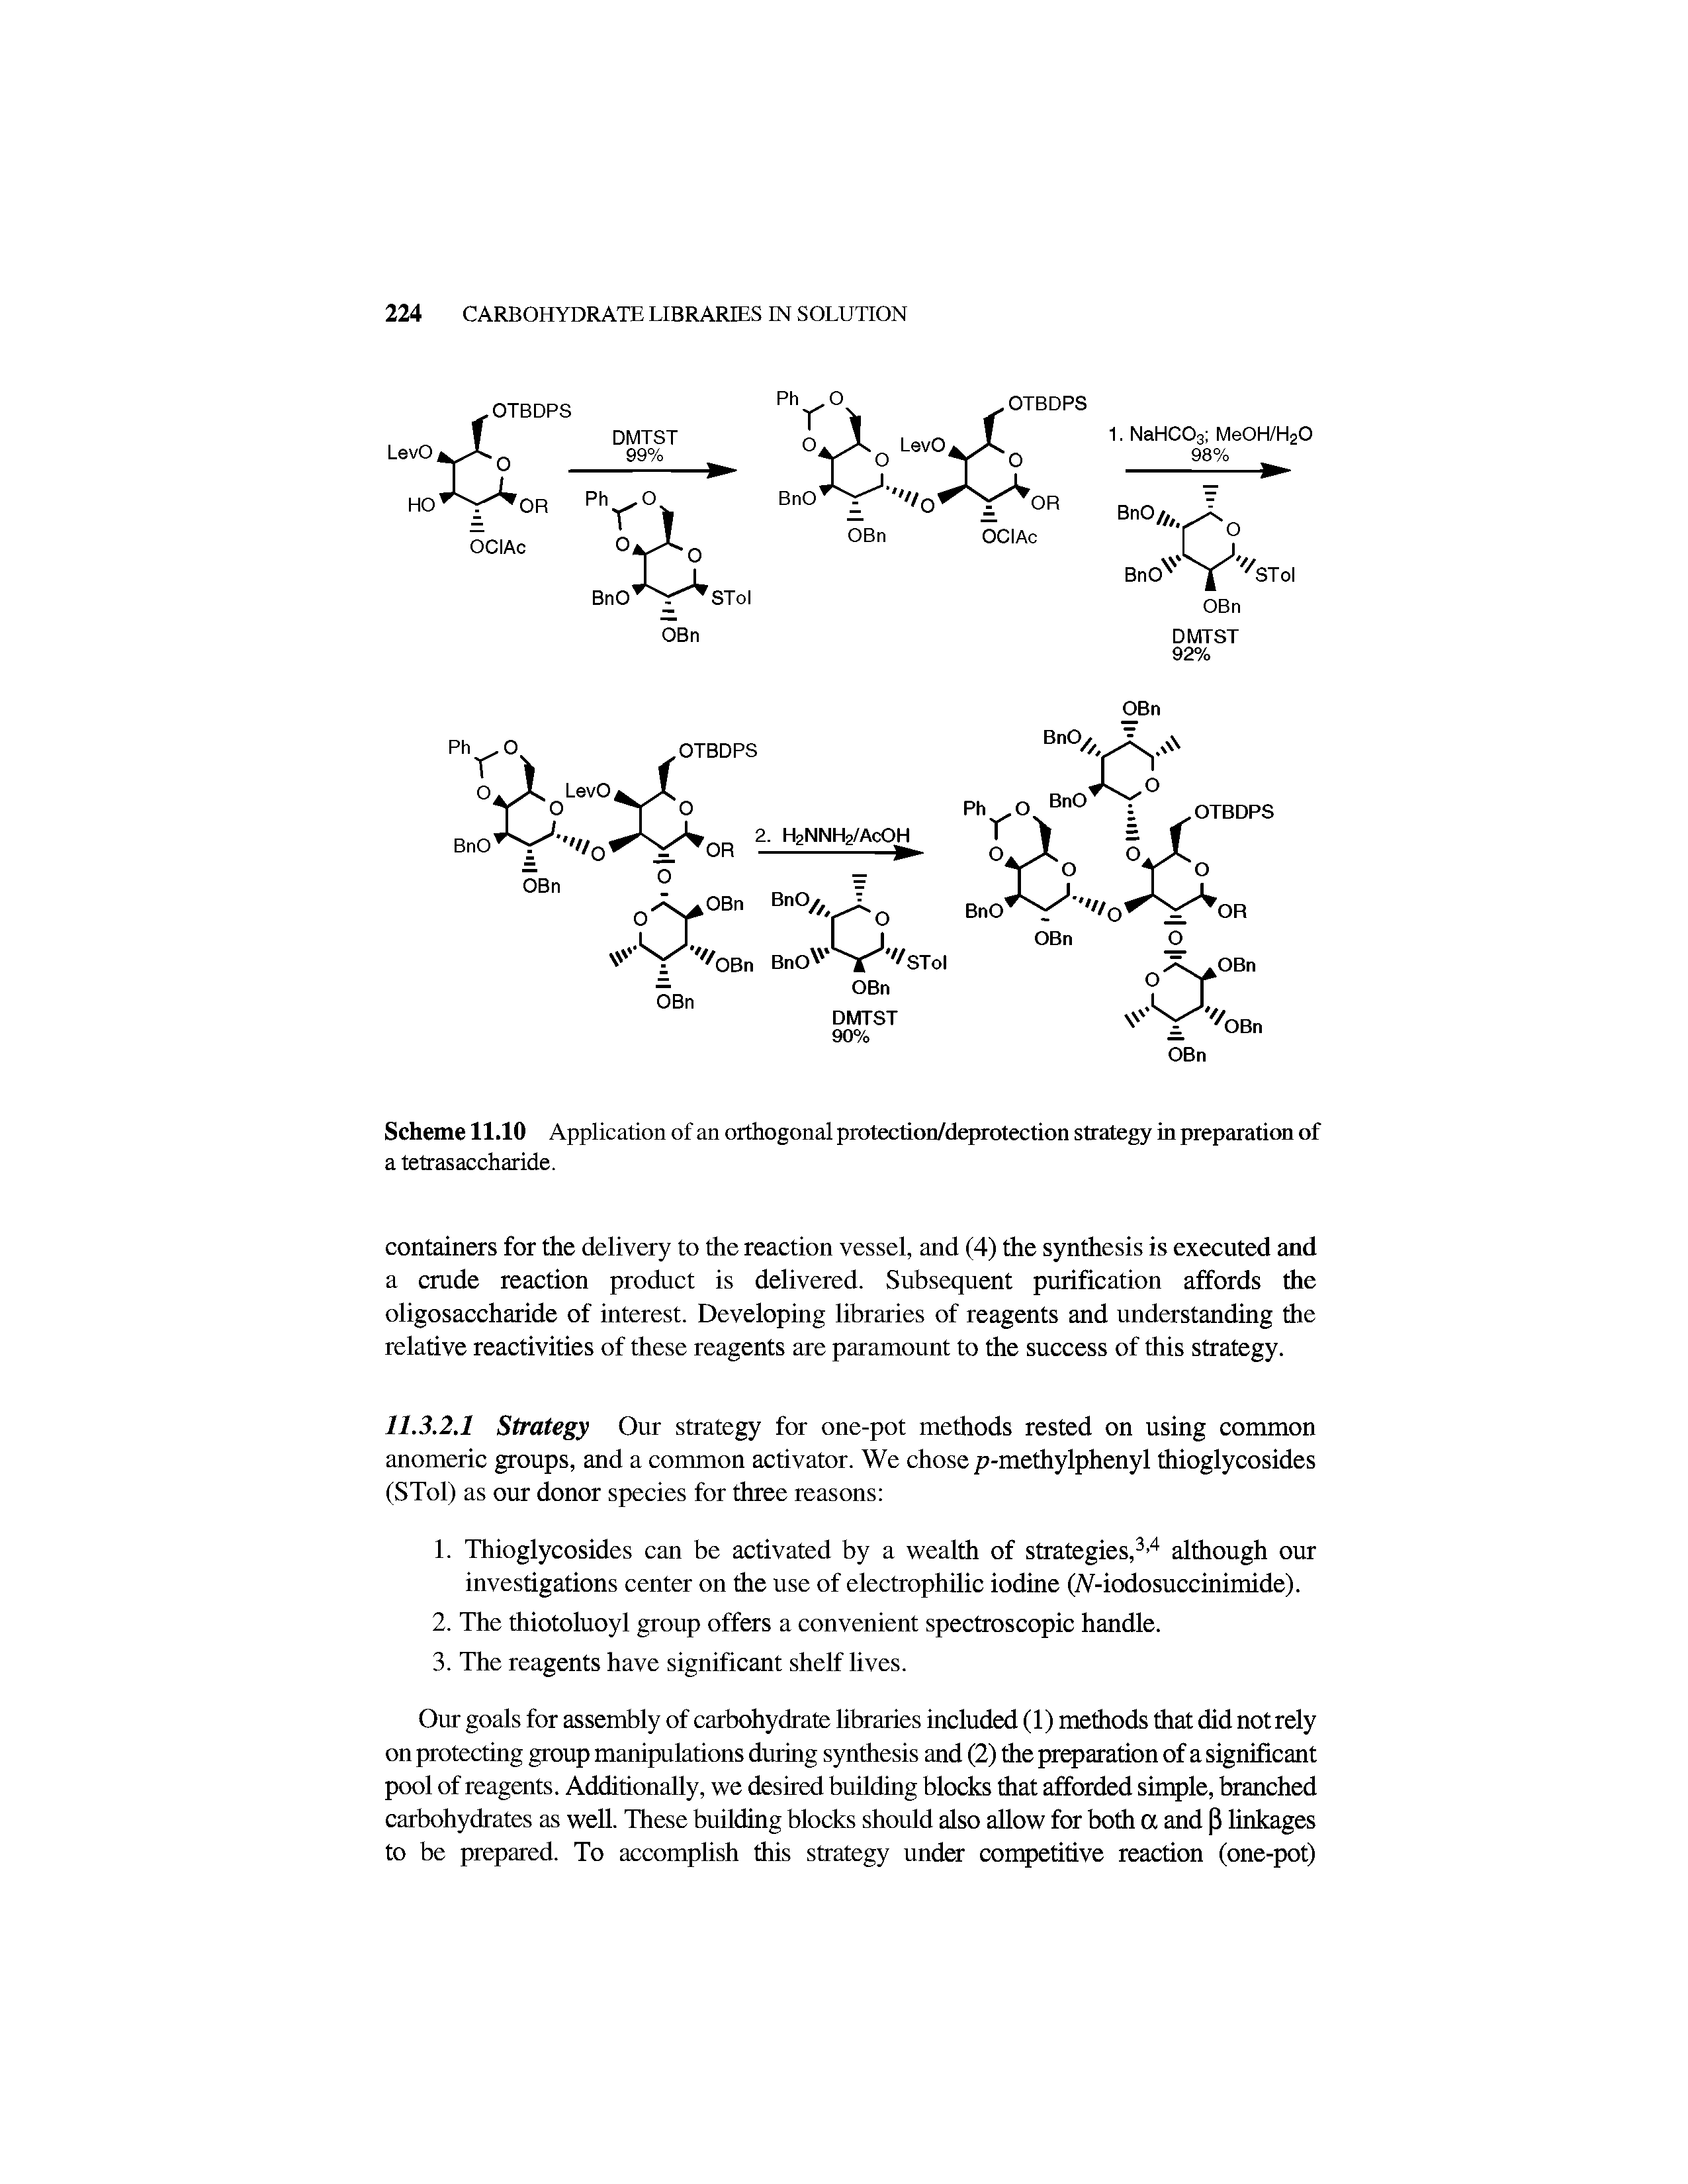 Scheme 11.10 Application of an orthogonal protection/deprotection strategy in preparation of a tetrasaccharide.